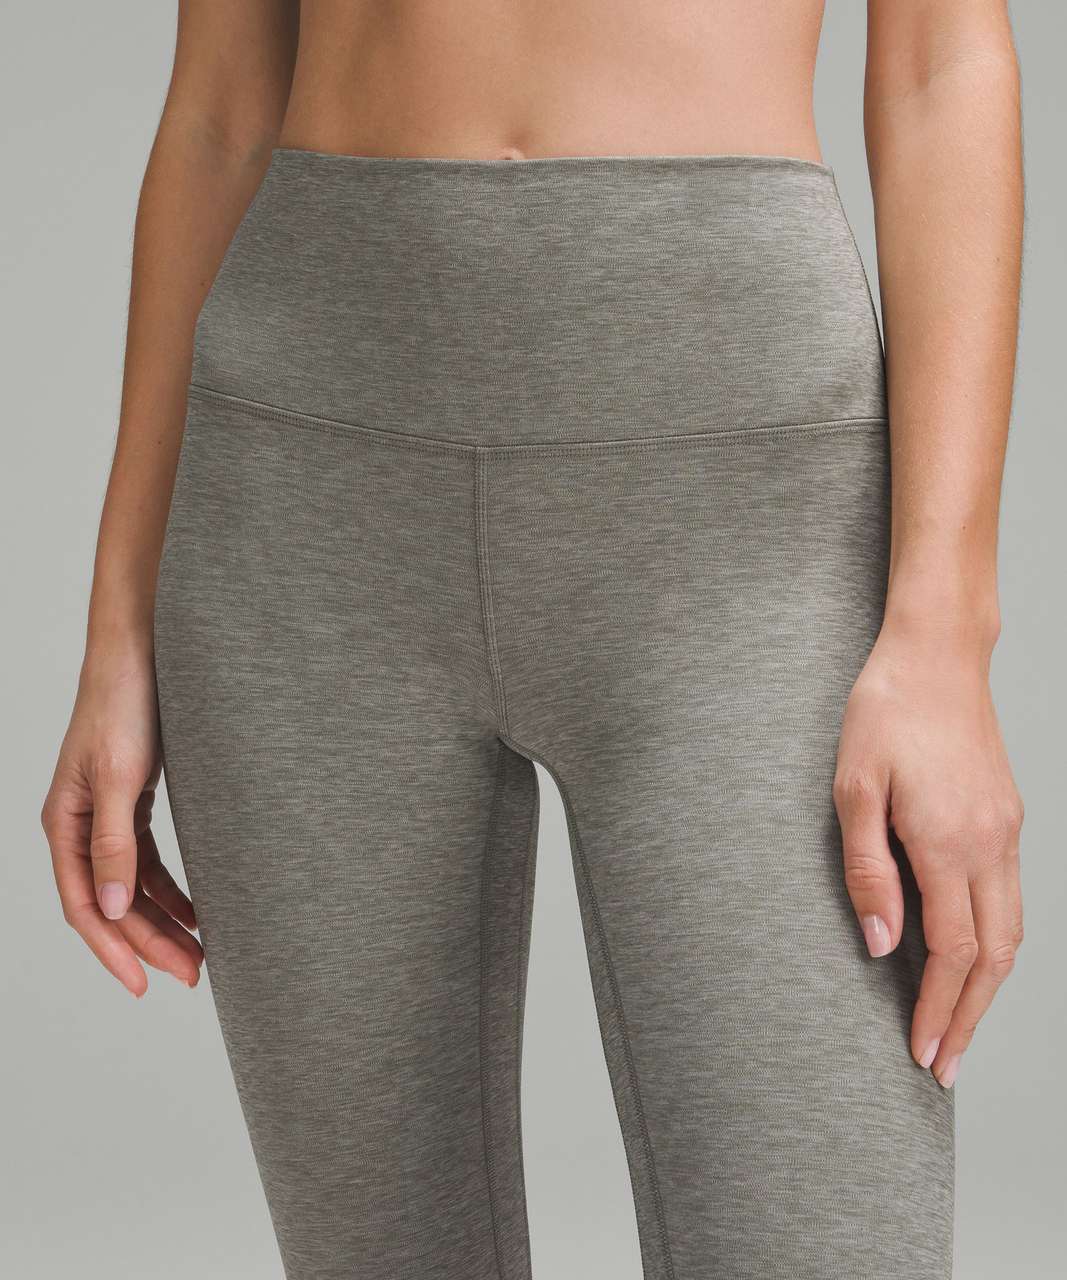 The best aligns are any of the grey heathered ones! I have these linke, lululemon